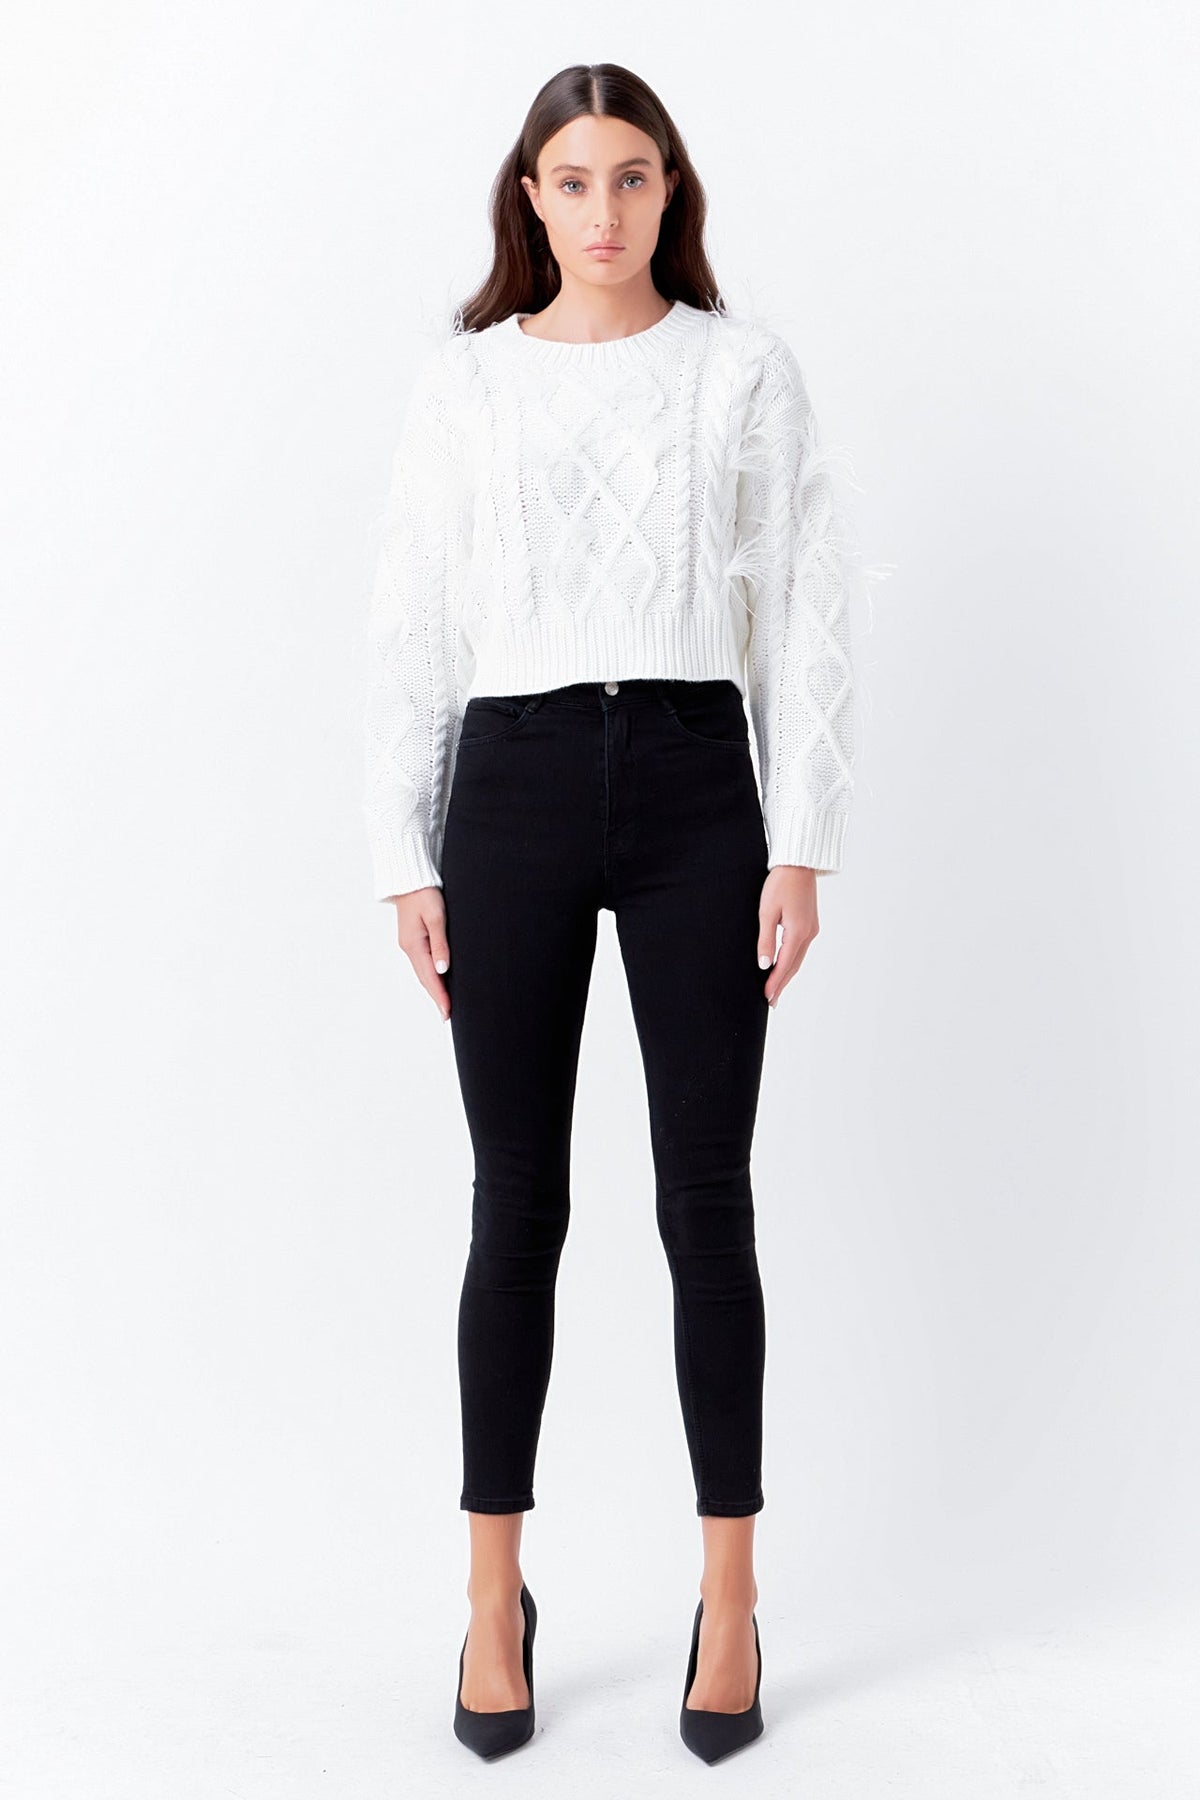 ENDLESS ROSE-Feather Detail Cropped Sweater-SWEATERS & KNITS available at Objectrare